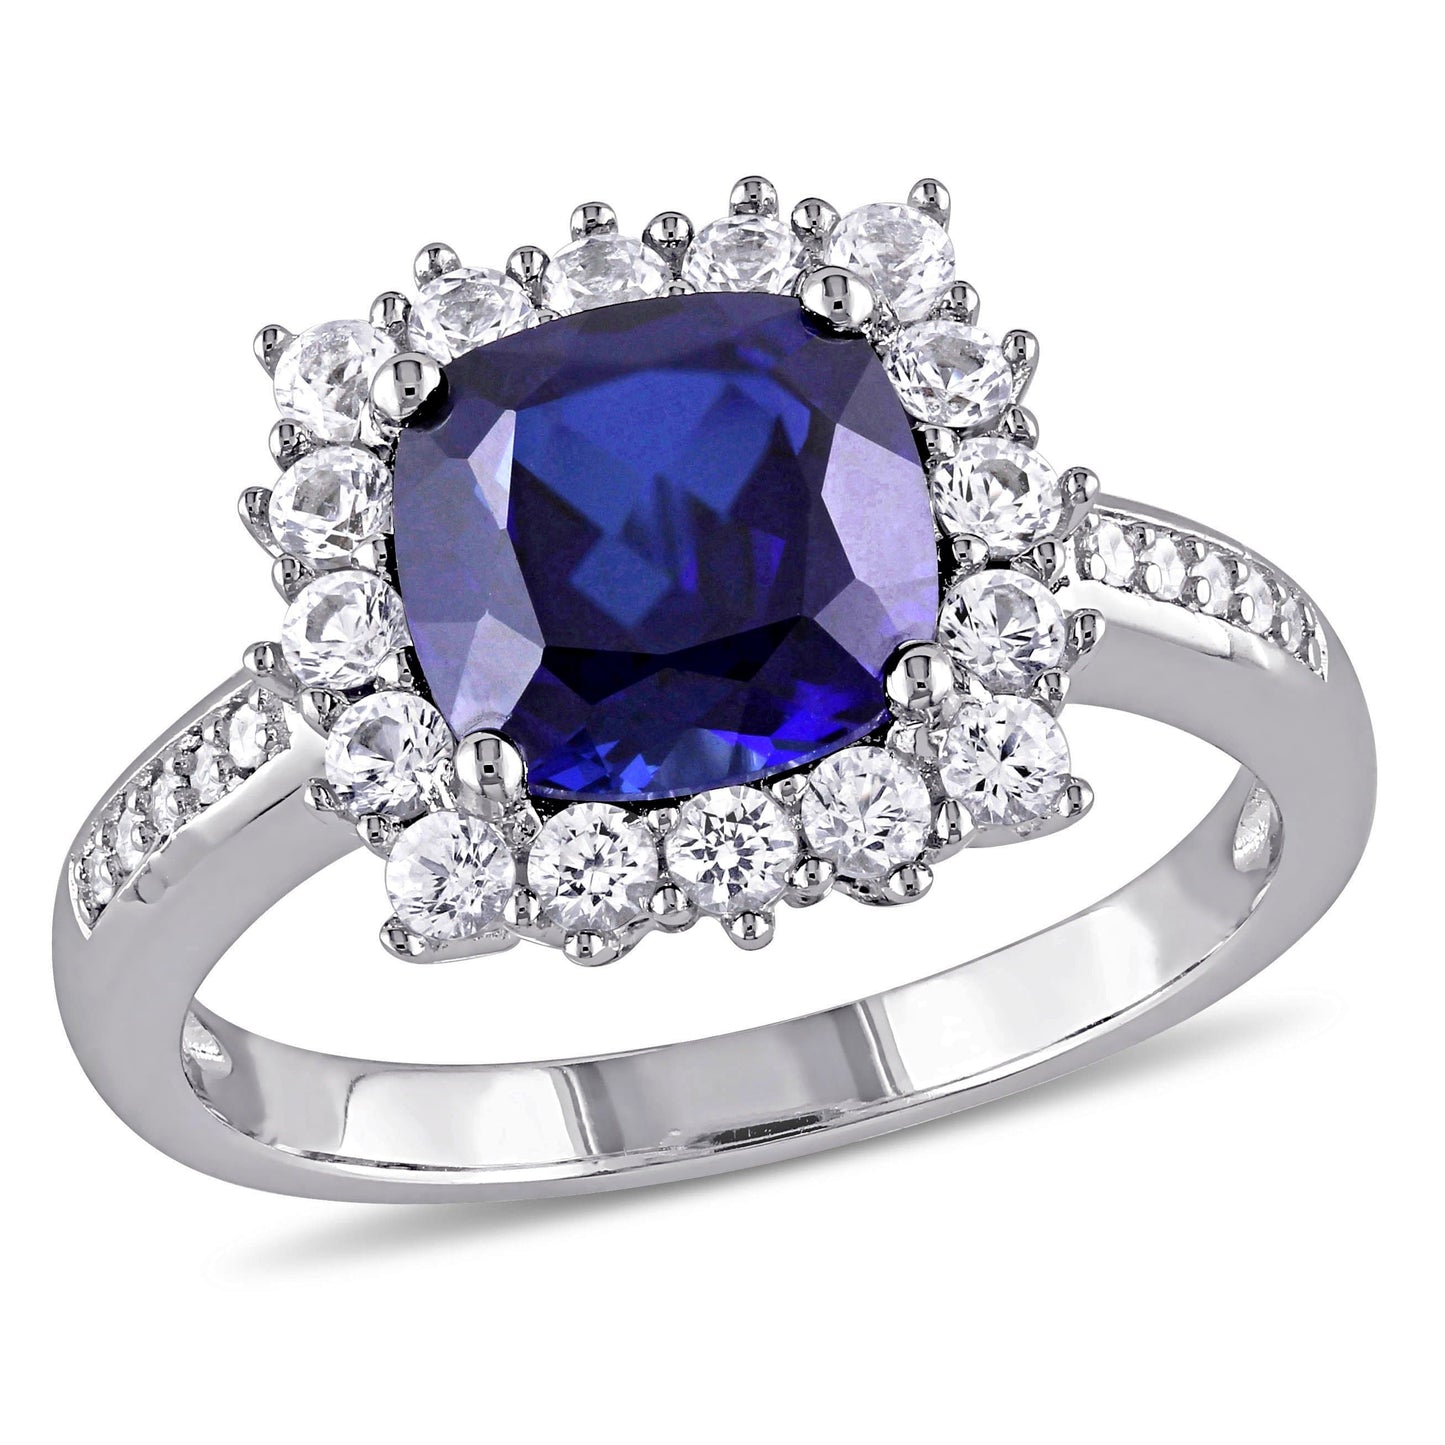 Blue & White Sapphire Ring With Diamond Accents